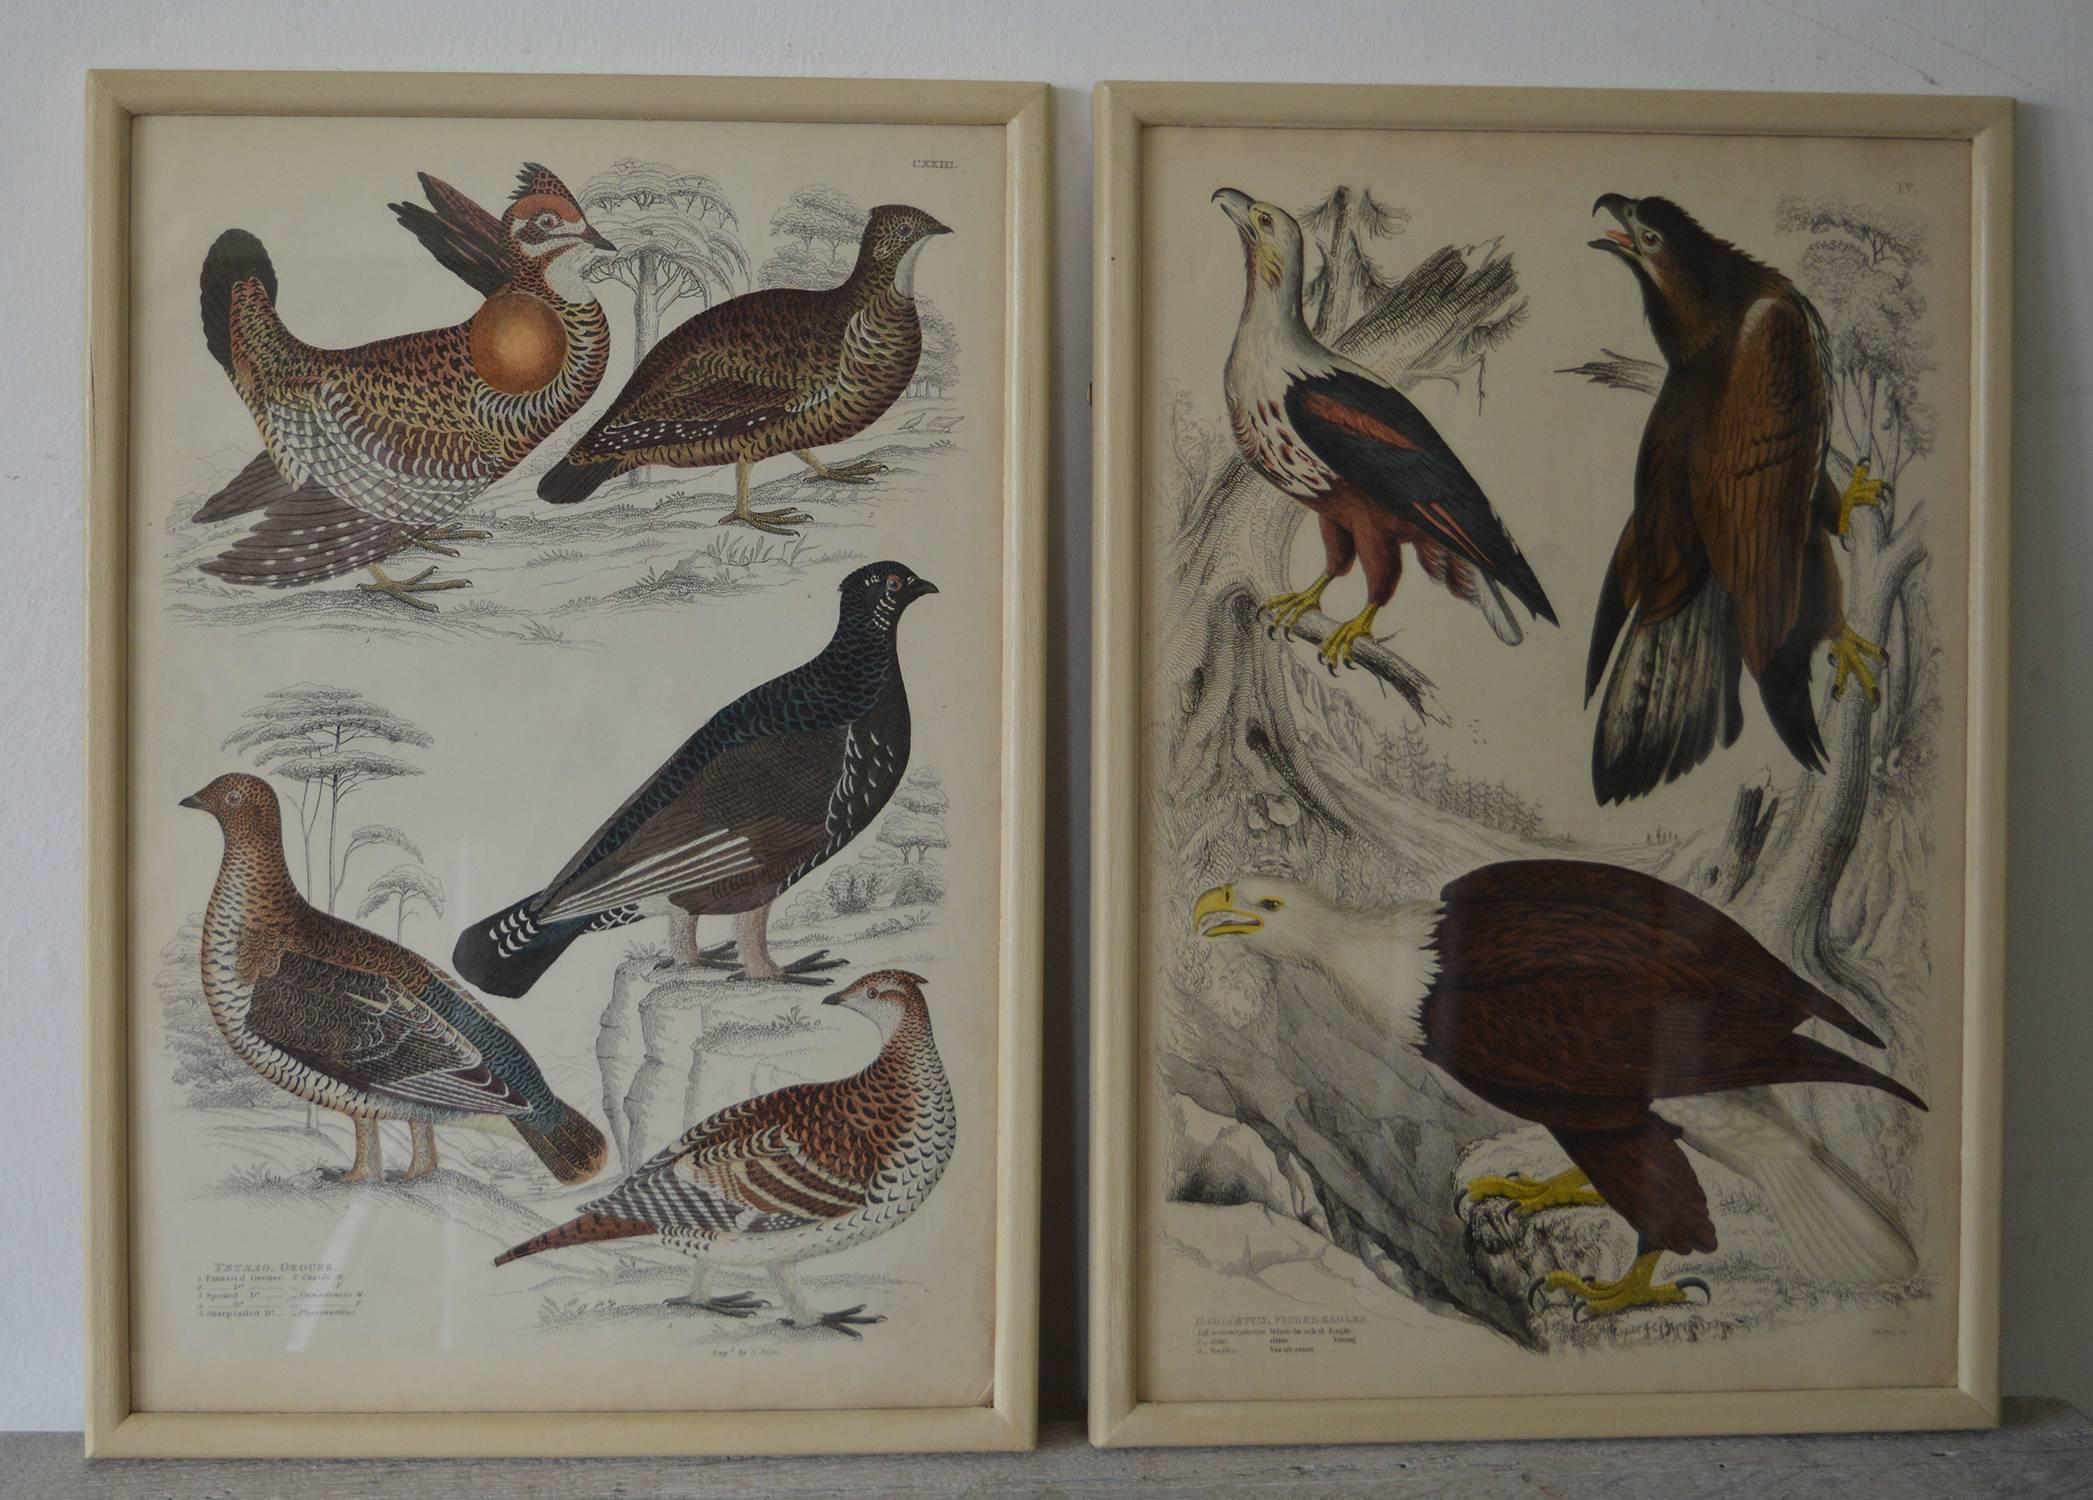 Paper Set of 18 ( 12 + 6 ) Antique Bird Prints in Faux Ivory Frames, 1830s